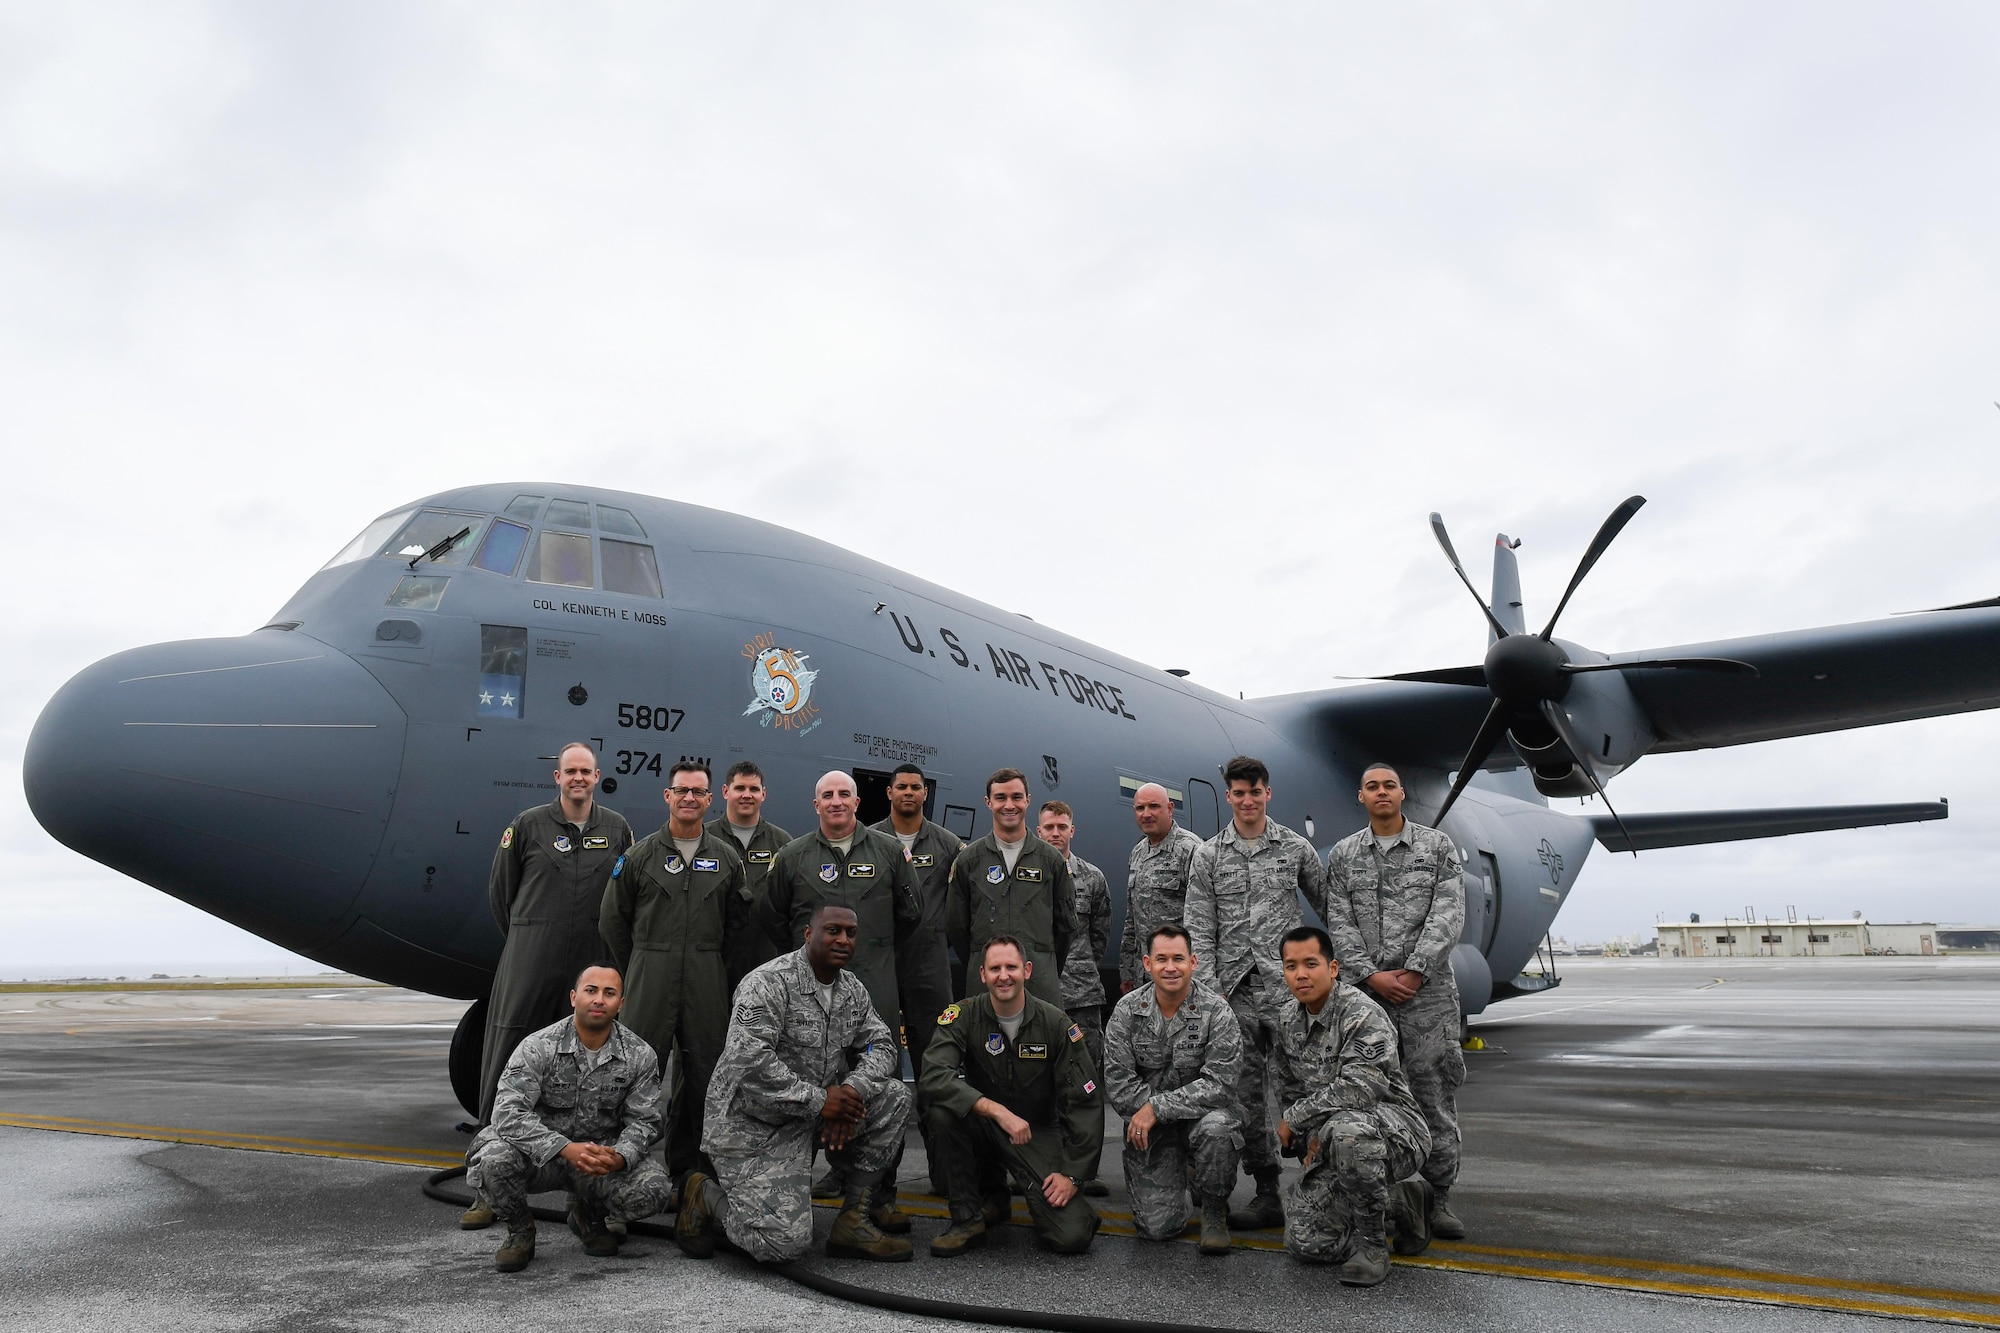 Members of the C-130J delivery team pose for a photo in front of a C-130J Super Hercules at Kadena Air Base, Japan, March 6, 2017. This is the first C-130J to be assigned to Pacific Air Forces.  Yokota serves as the primary Western Pacific airlift hub for U.S. Air Force peacetime and contingency operations. Missions include tactical air land, airdrop, aeromedical evacuation, special operations and distinguished visitor airlift. (U.S. Air Force photo by Staff Sgt. Michael Smith)